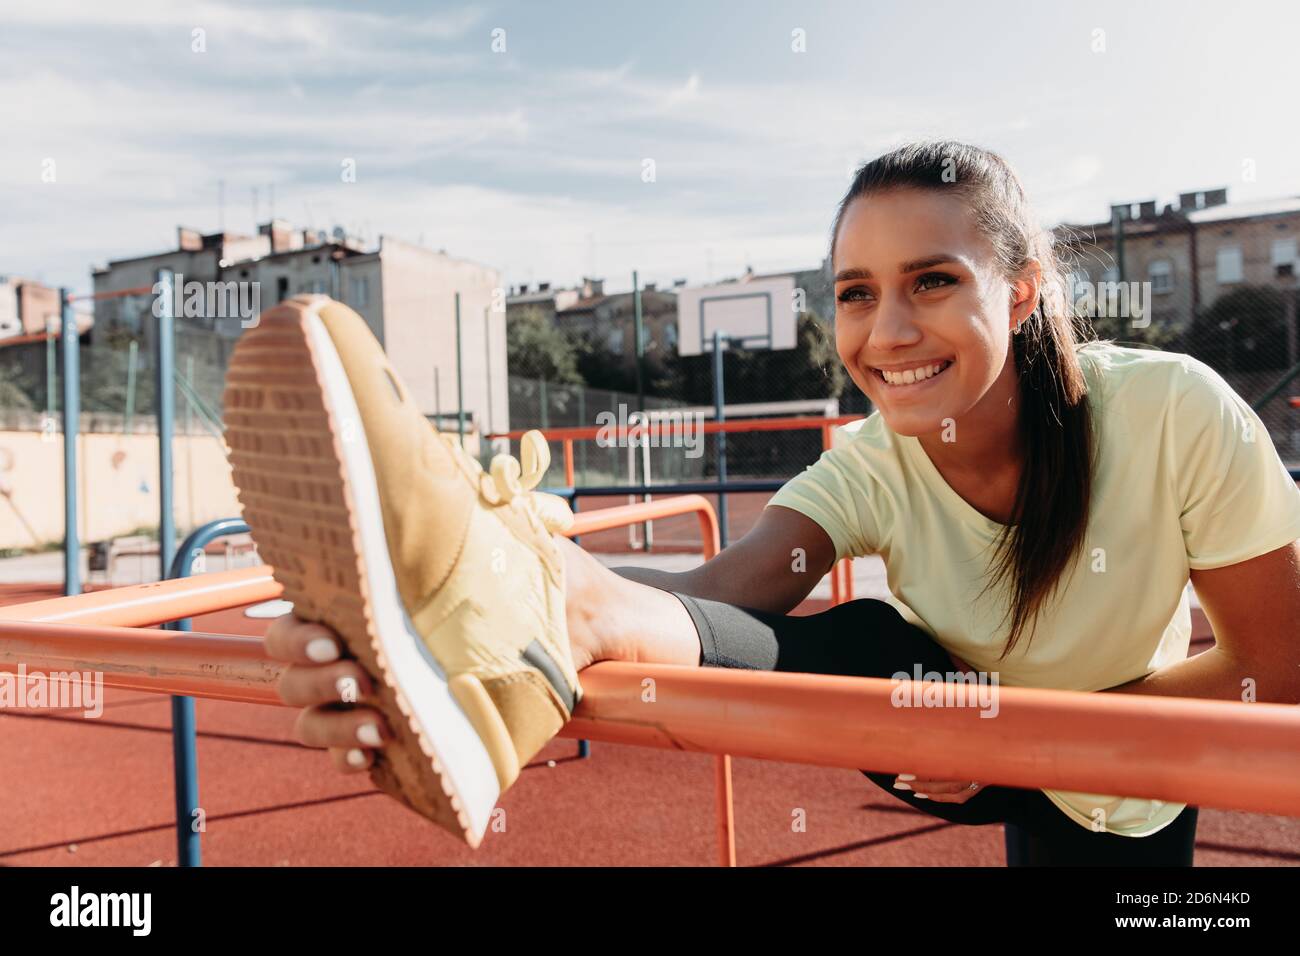 Cheerful woman stretching legs on sport ground Stock Photo